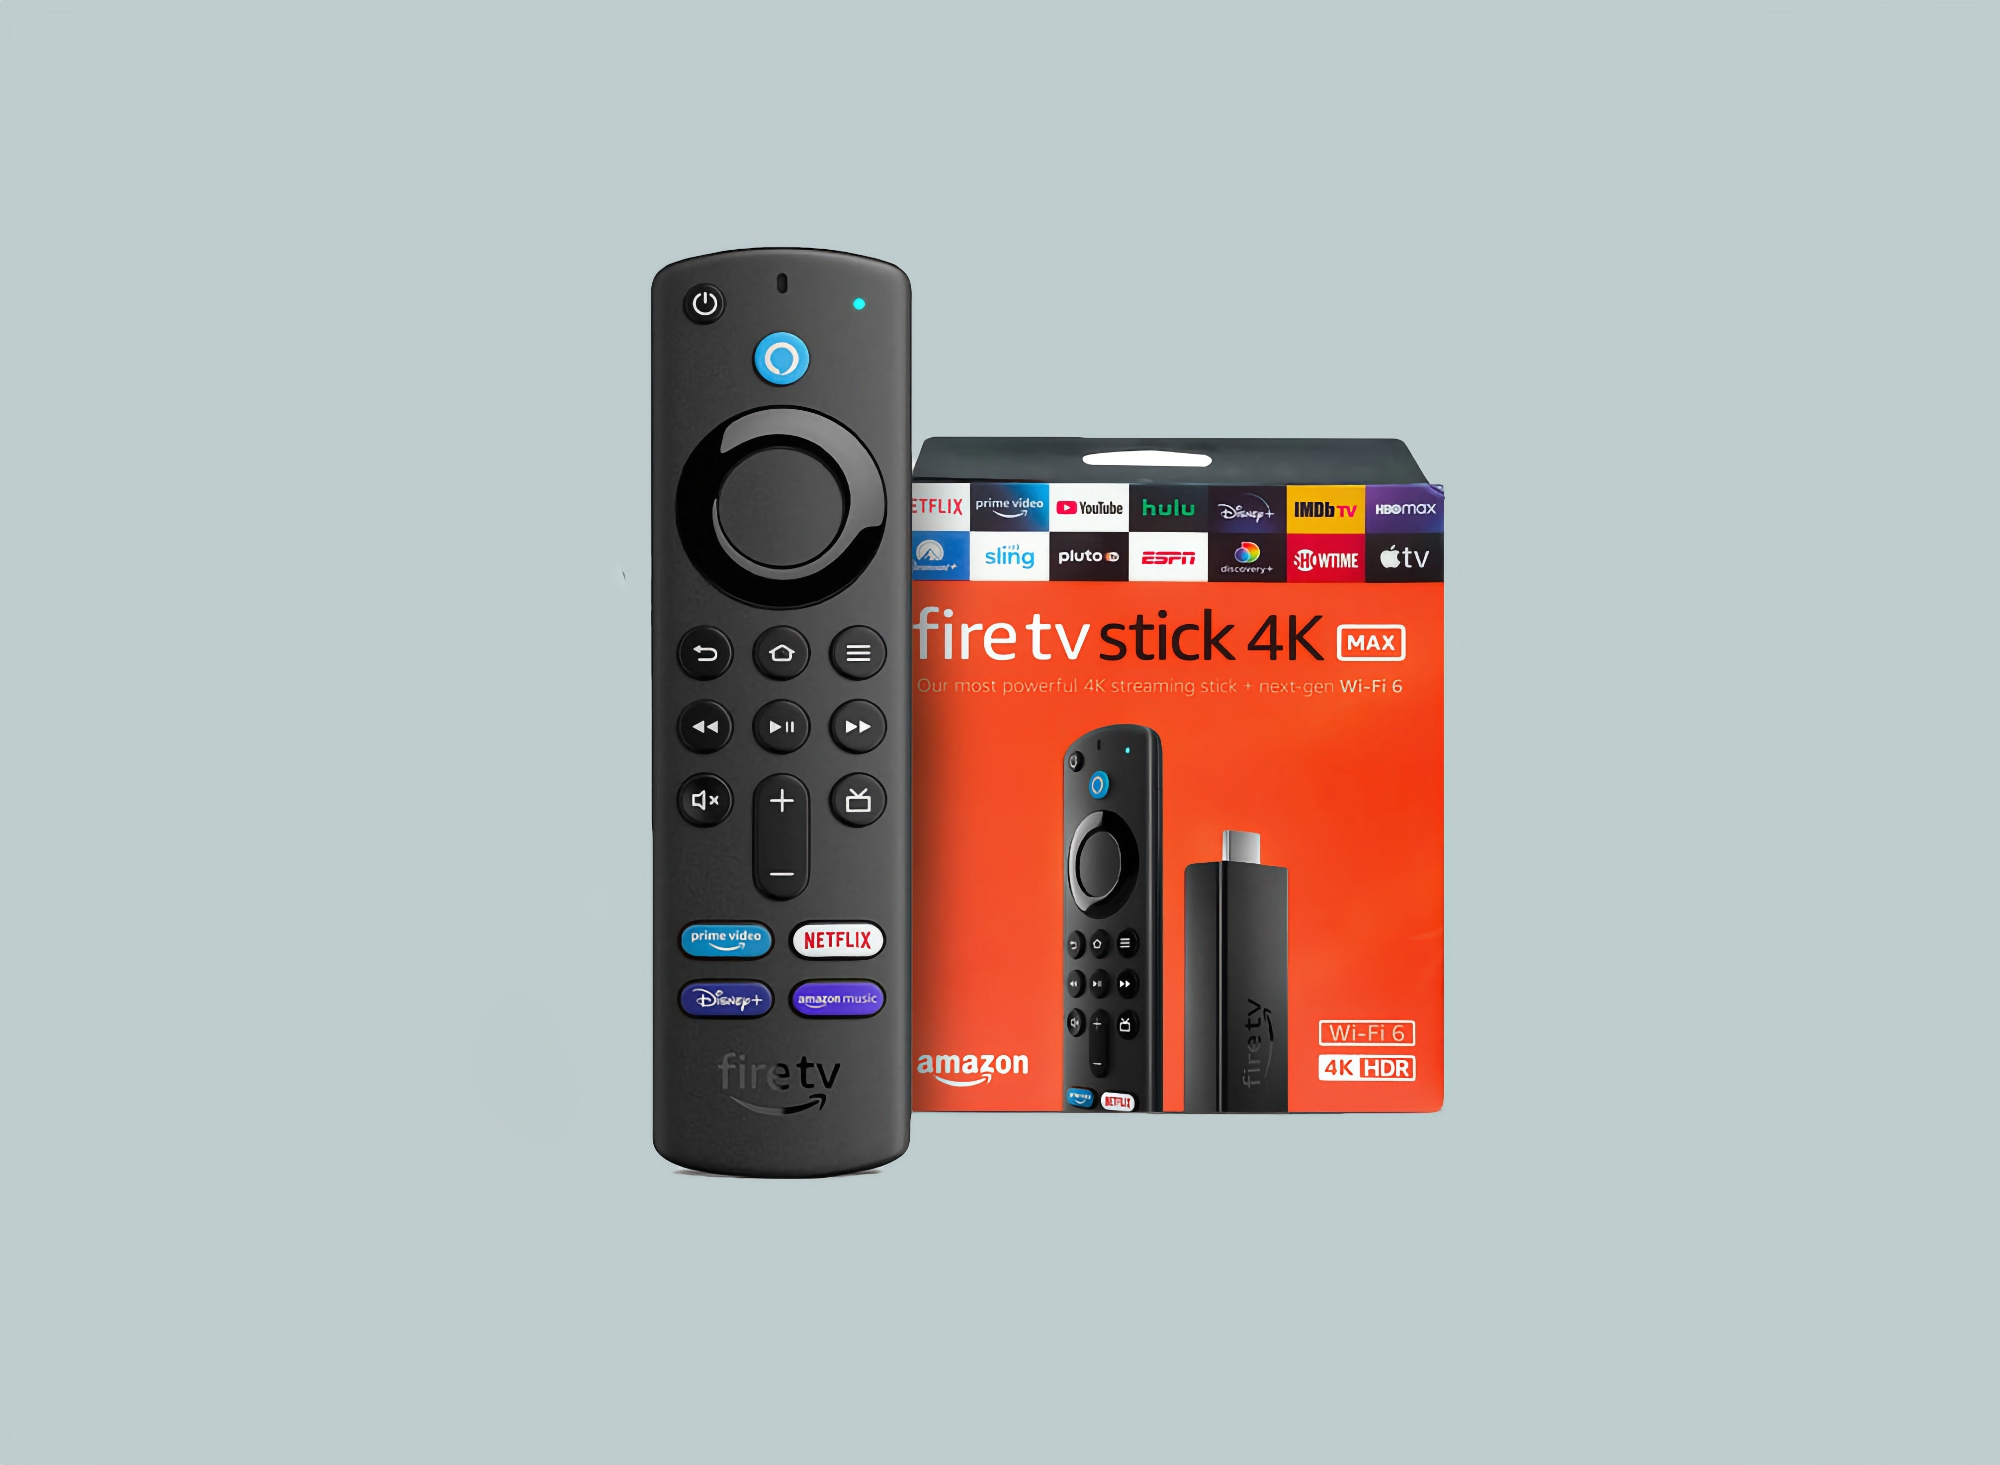 Amazon Fire TV Stick 4K Max with Alexa and Wi-Fi available for $20 off 